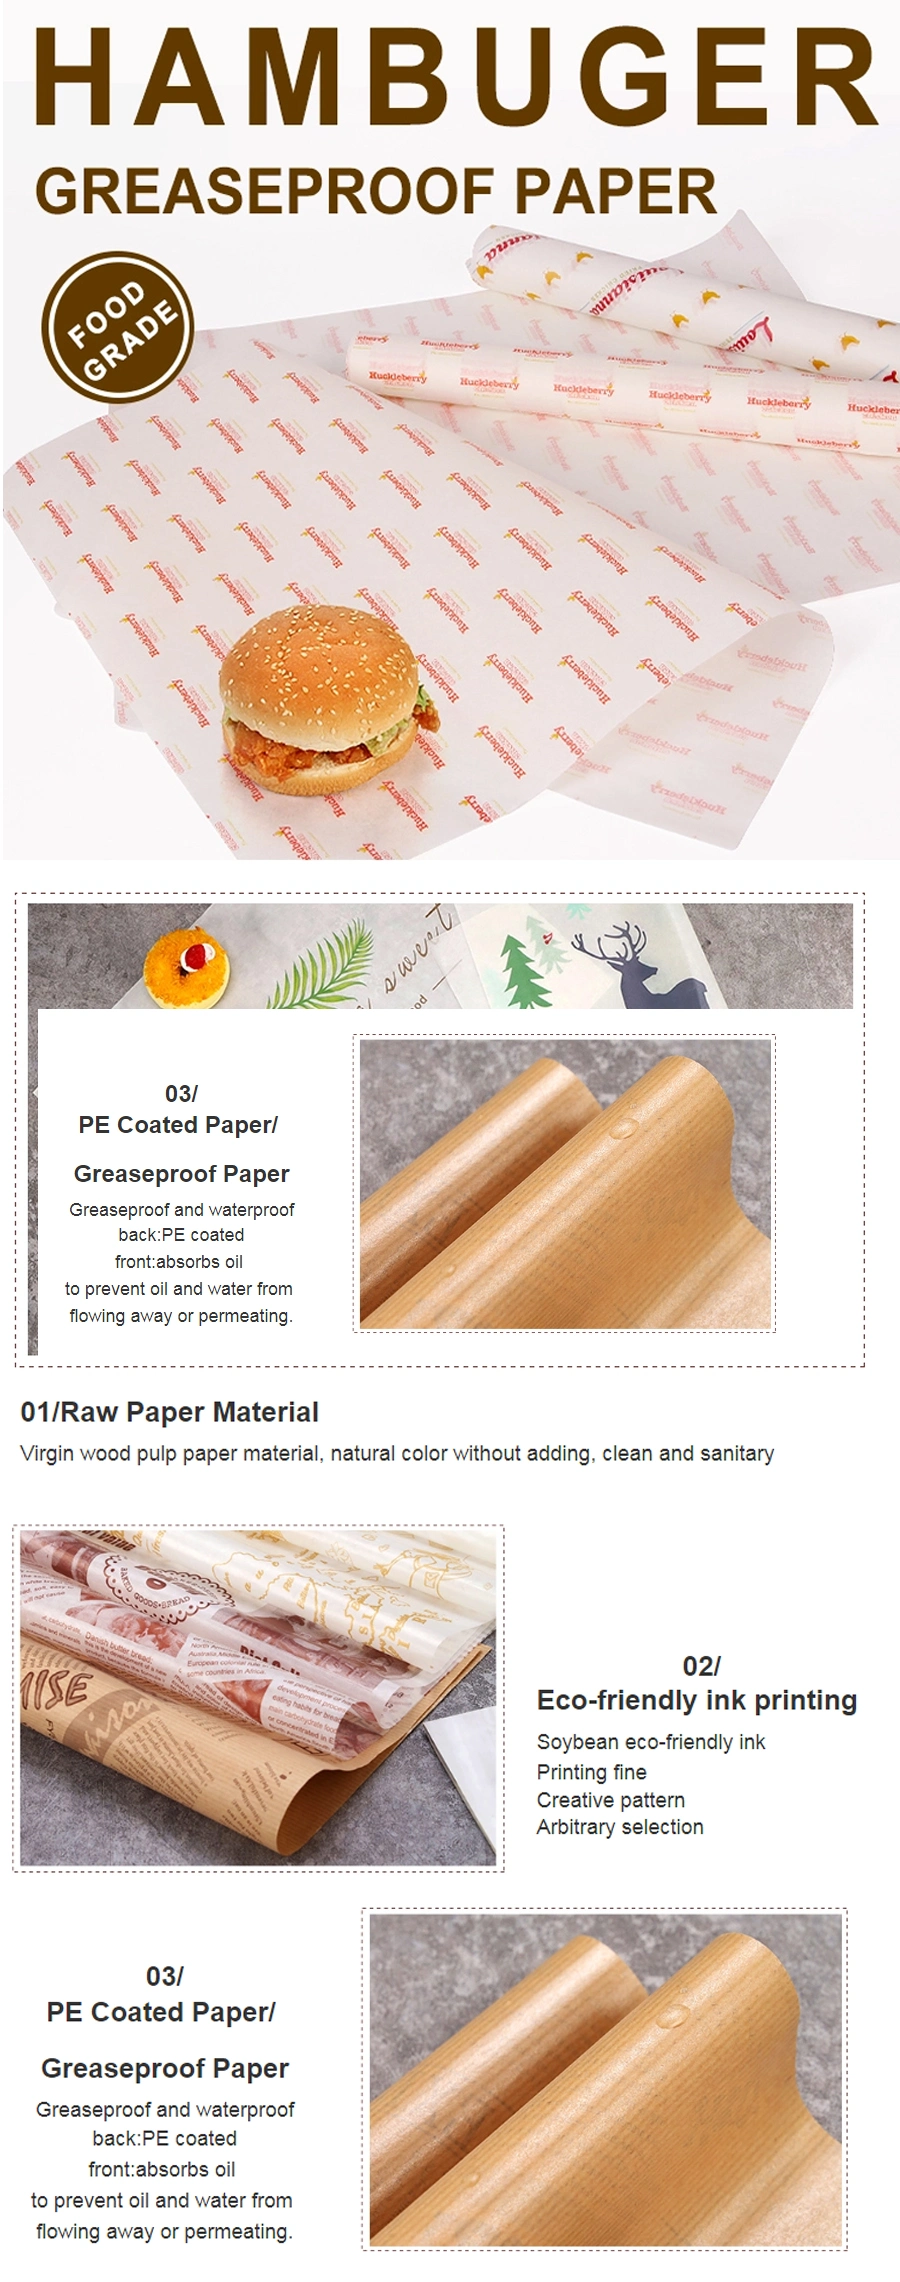 Food Grease Proof Custom Colored Logo Printed Butter Hamburger Sandwich Packaging Wrapping Paper Bread Packing Paper